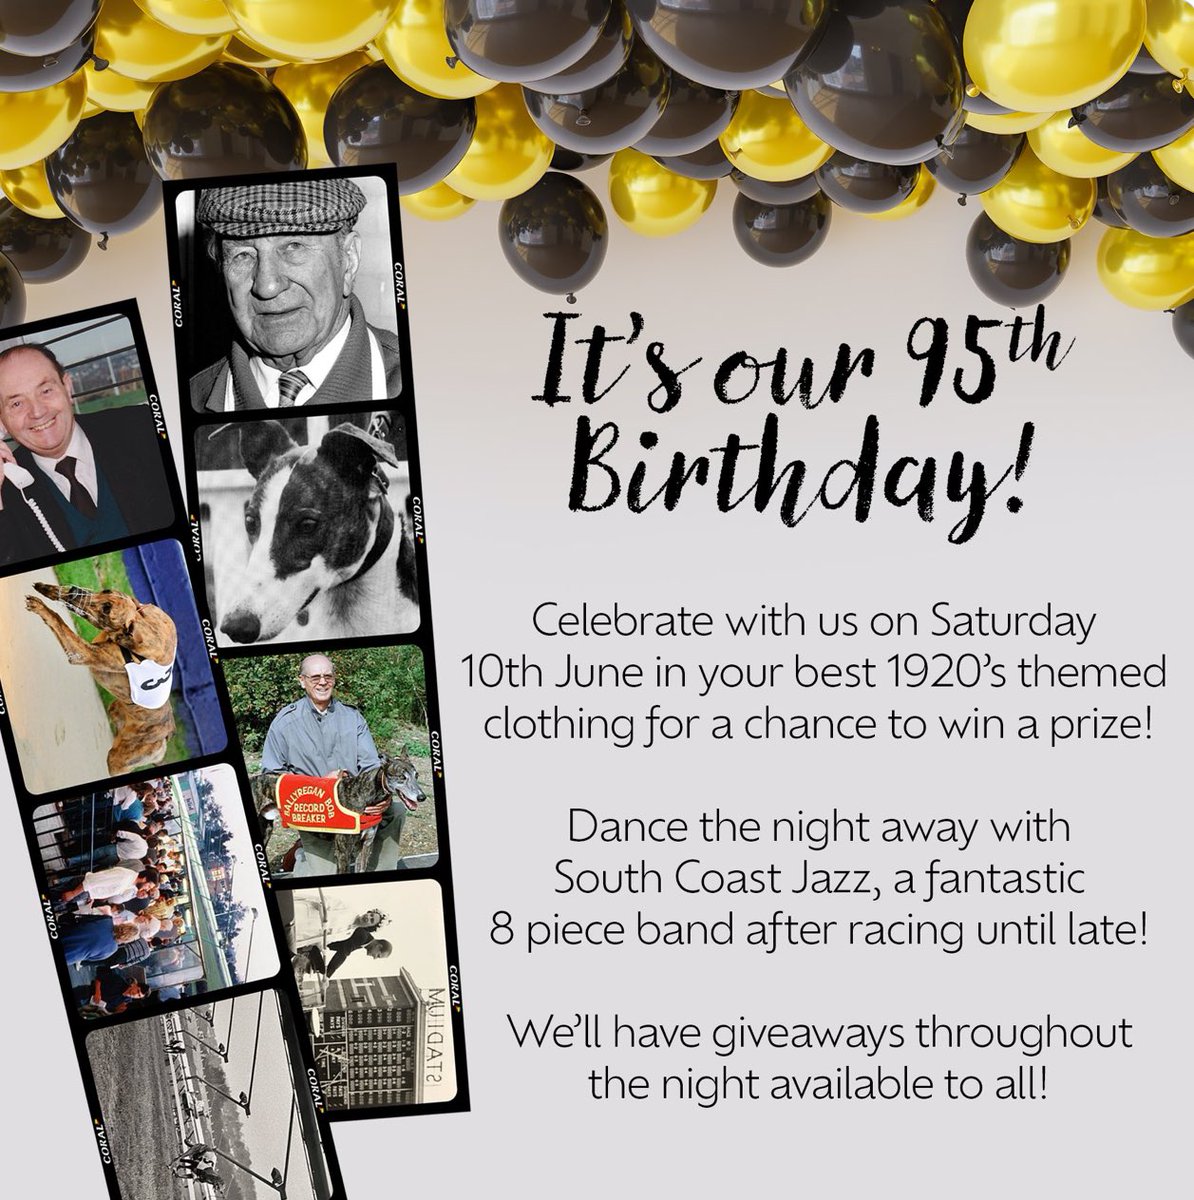 It’s a huge night of celebration @hovegreyhounds this evening!
#comeracing
#birthdaycelebrations